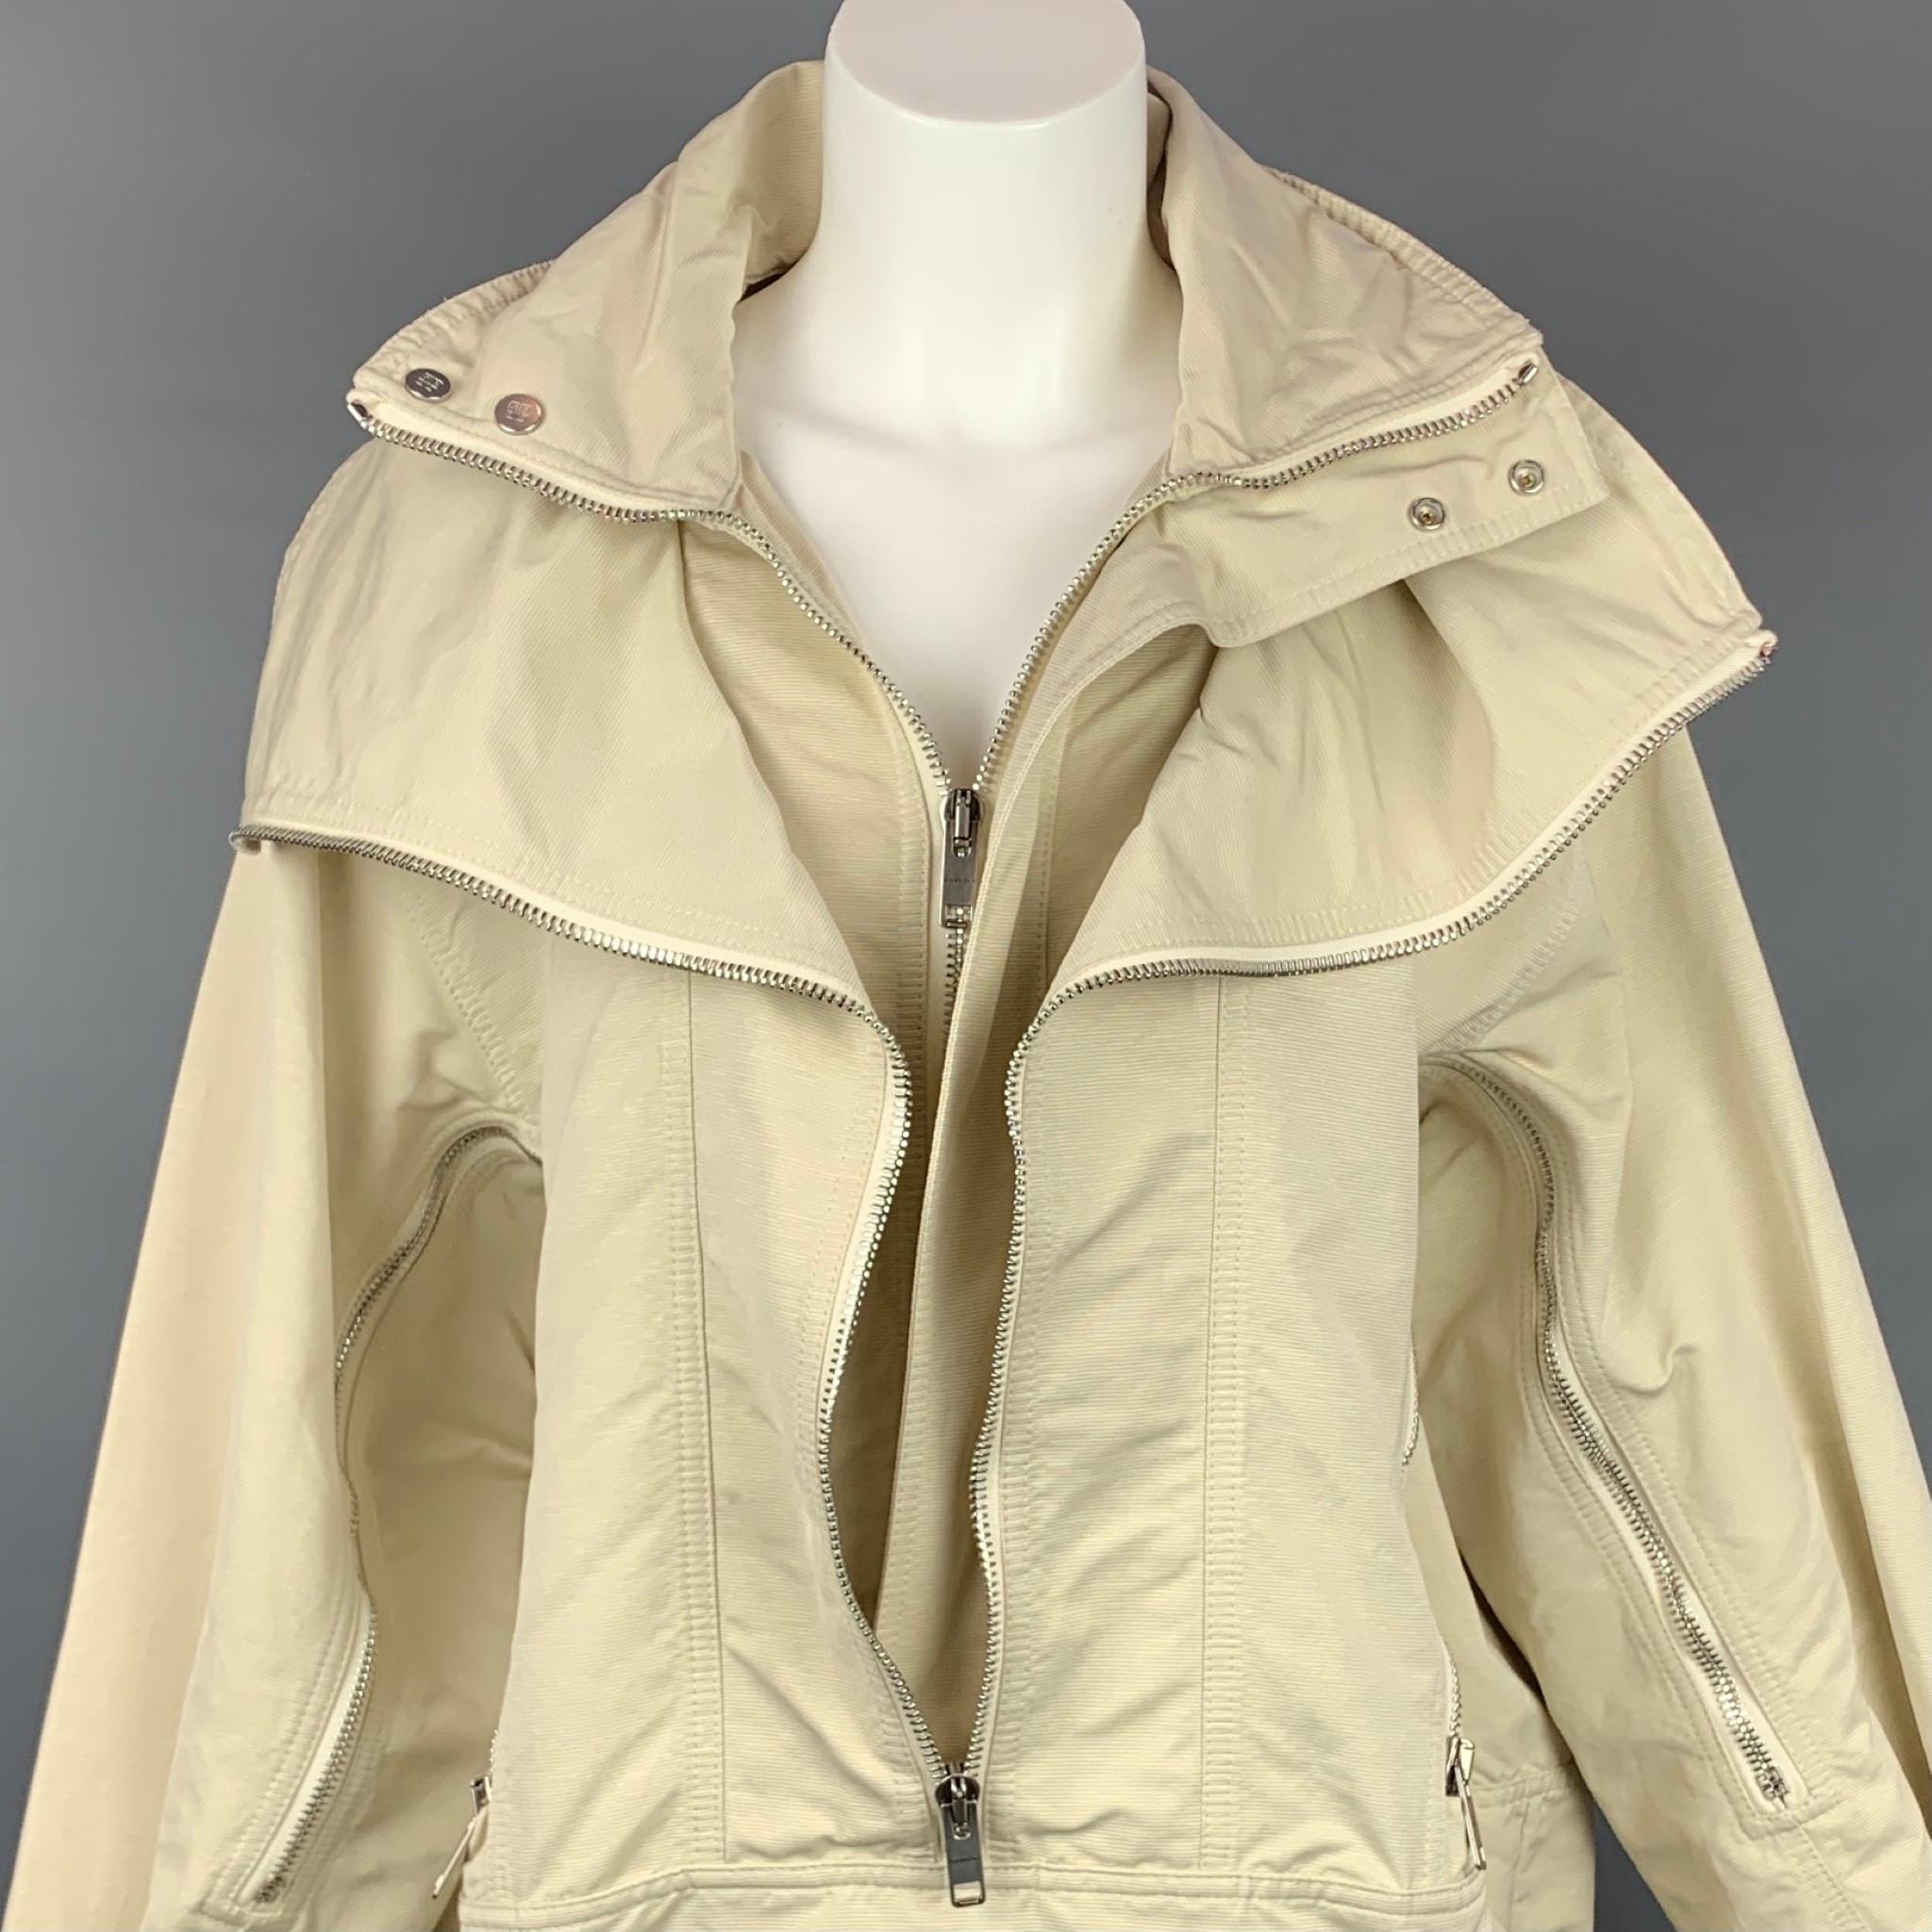 GIVENCHY Spring Summer 2021 jacket comes in a beige cotton polyester featuring a windbreaker style, oversized fit, fold over hood, double collar, zip detail at sleeves, and hook fastening tabs on the cuffs and hems. Made in Portugal.

Very Good